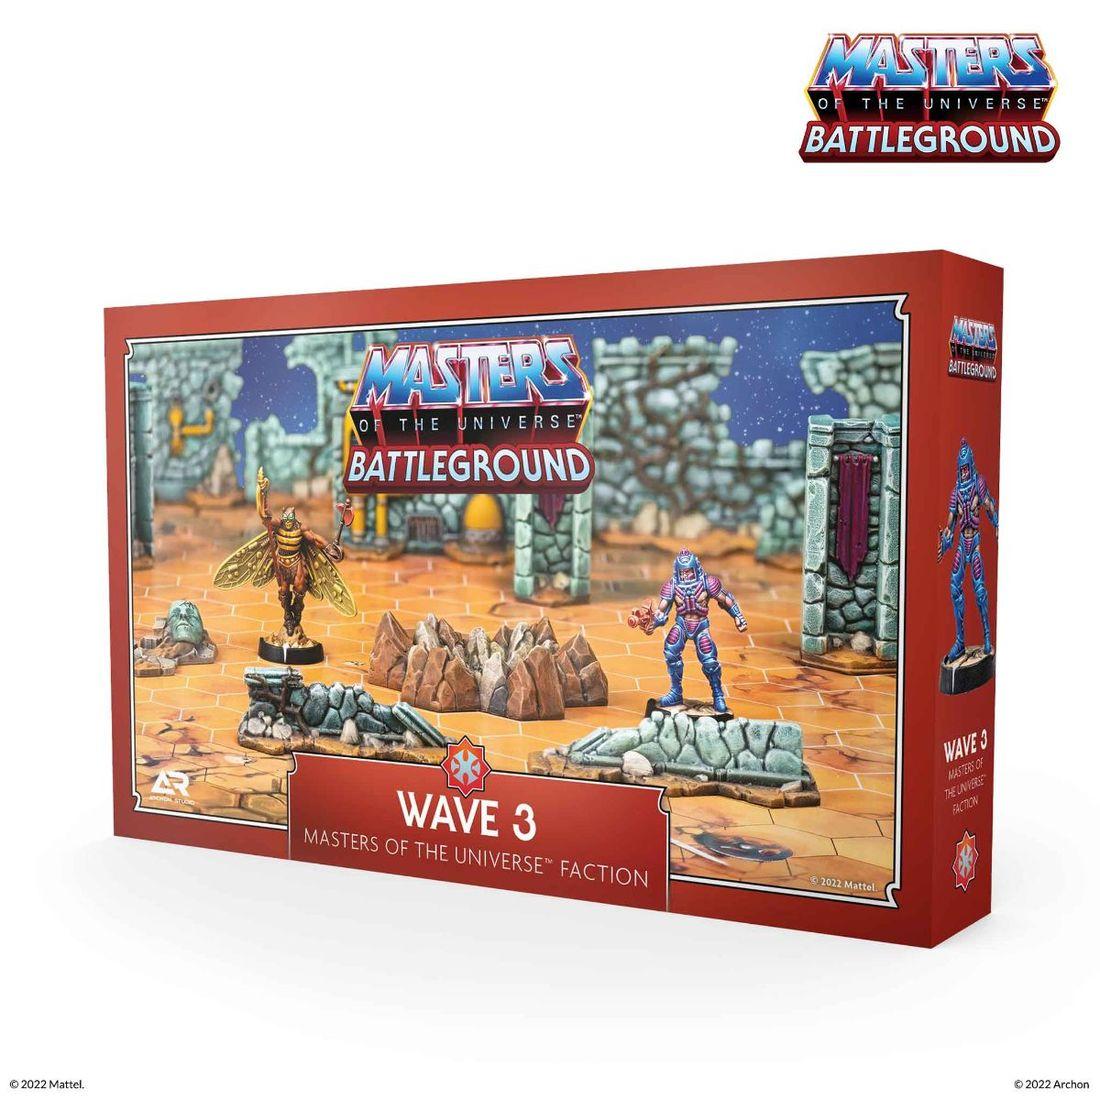 Masters of the Universe Battleground Wave 3 Master of the Universe Faction